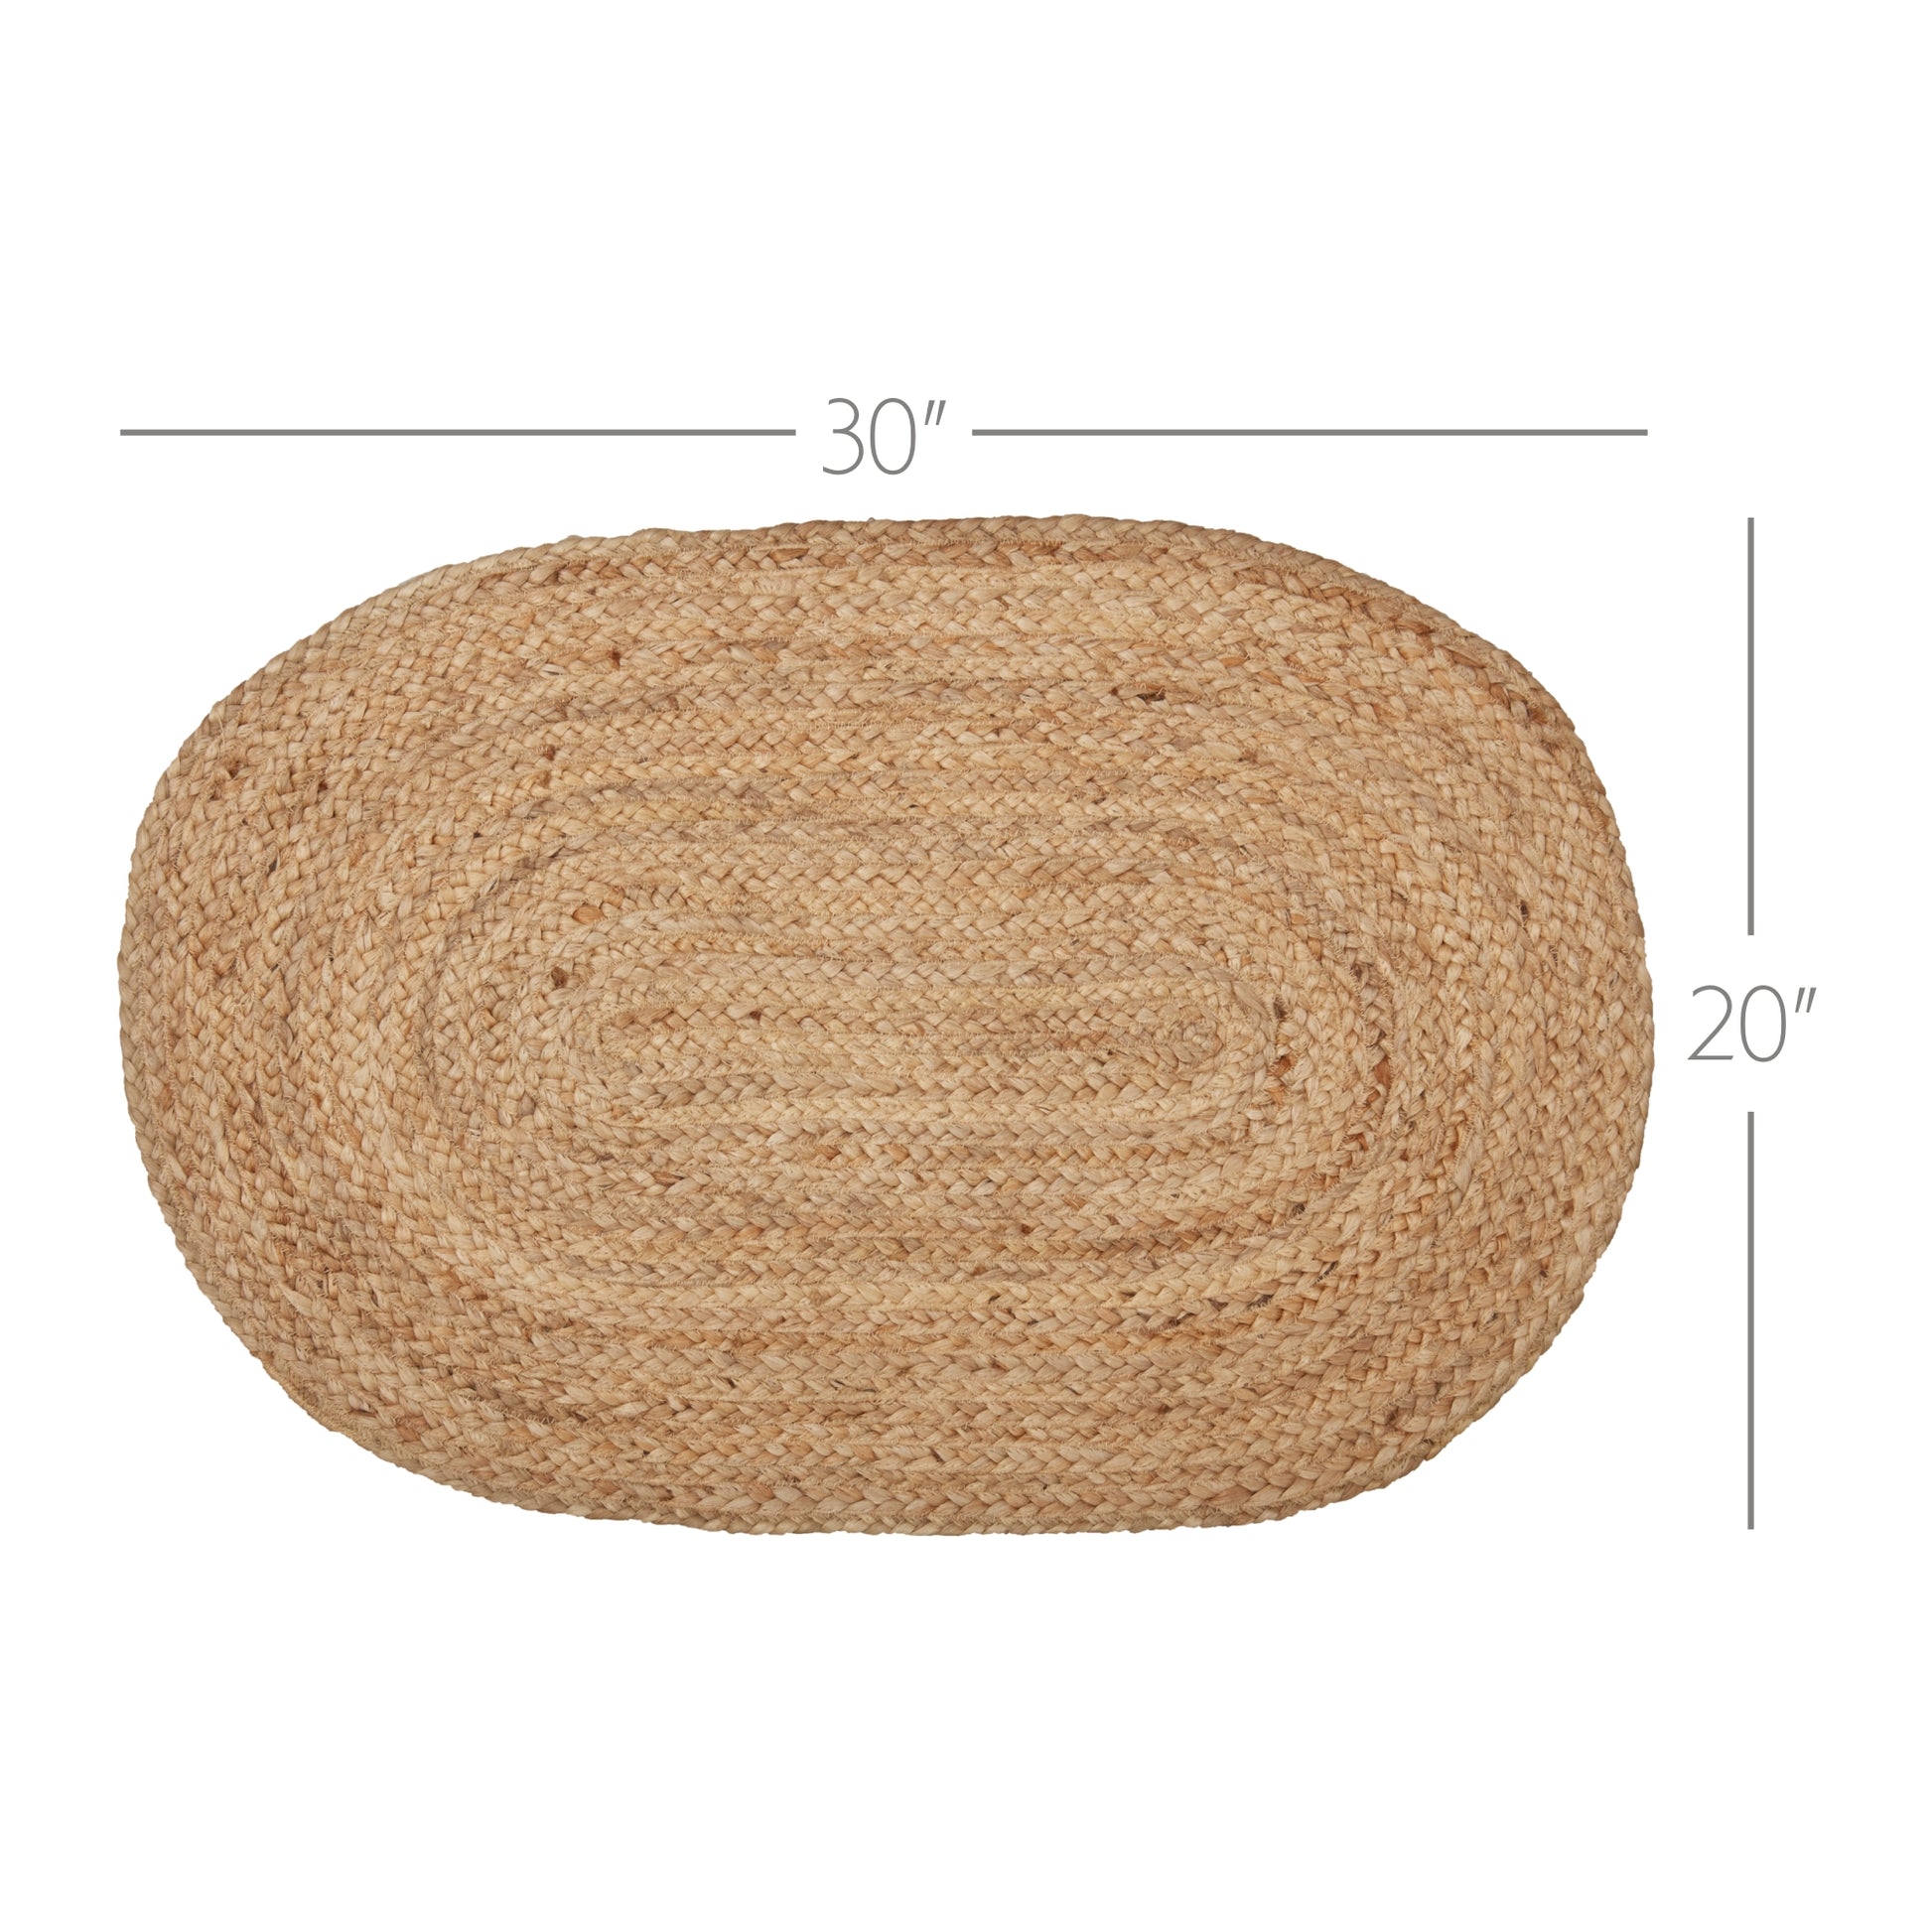 69384-Natural-Jute-Rug-Oval-w-Pad-20x30-image-1